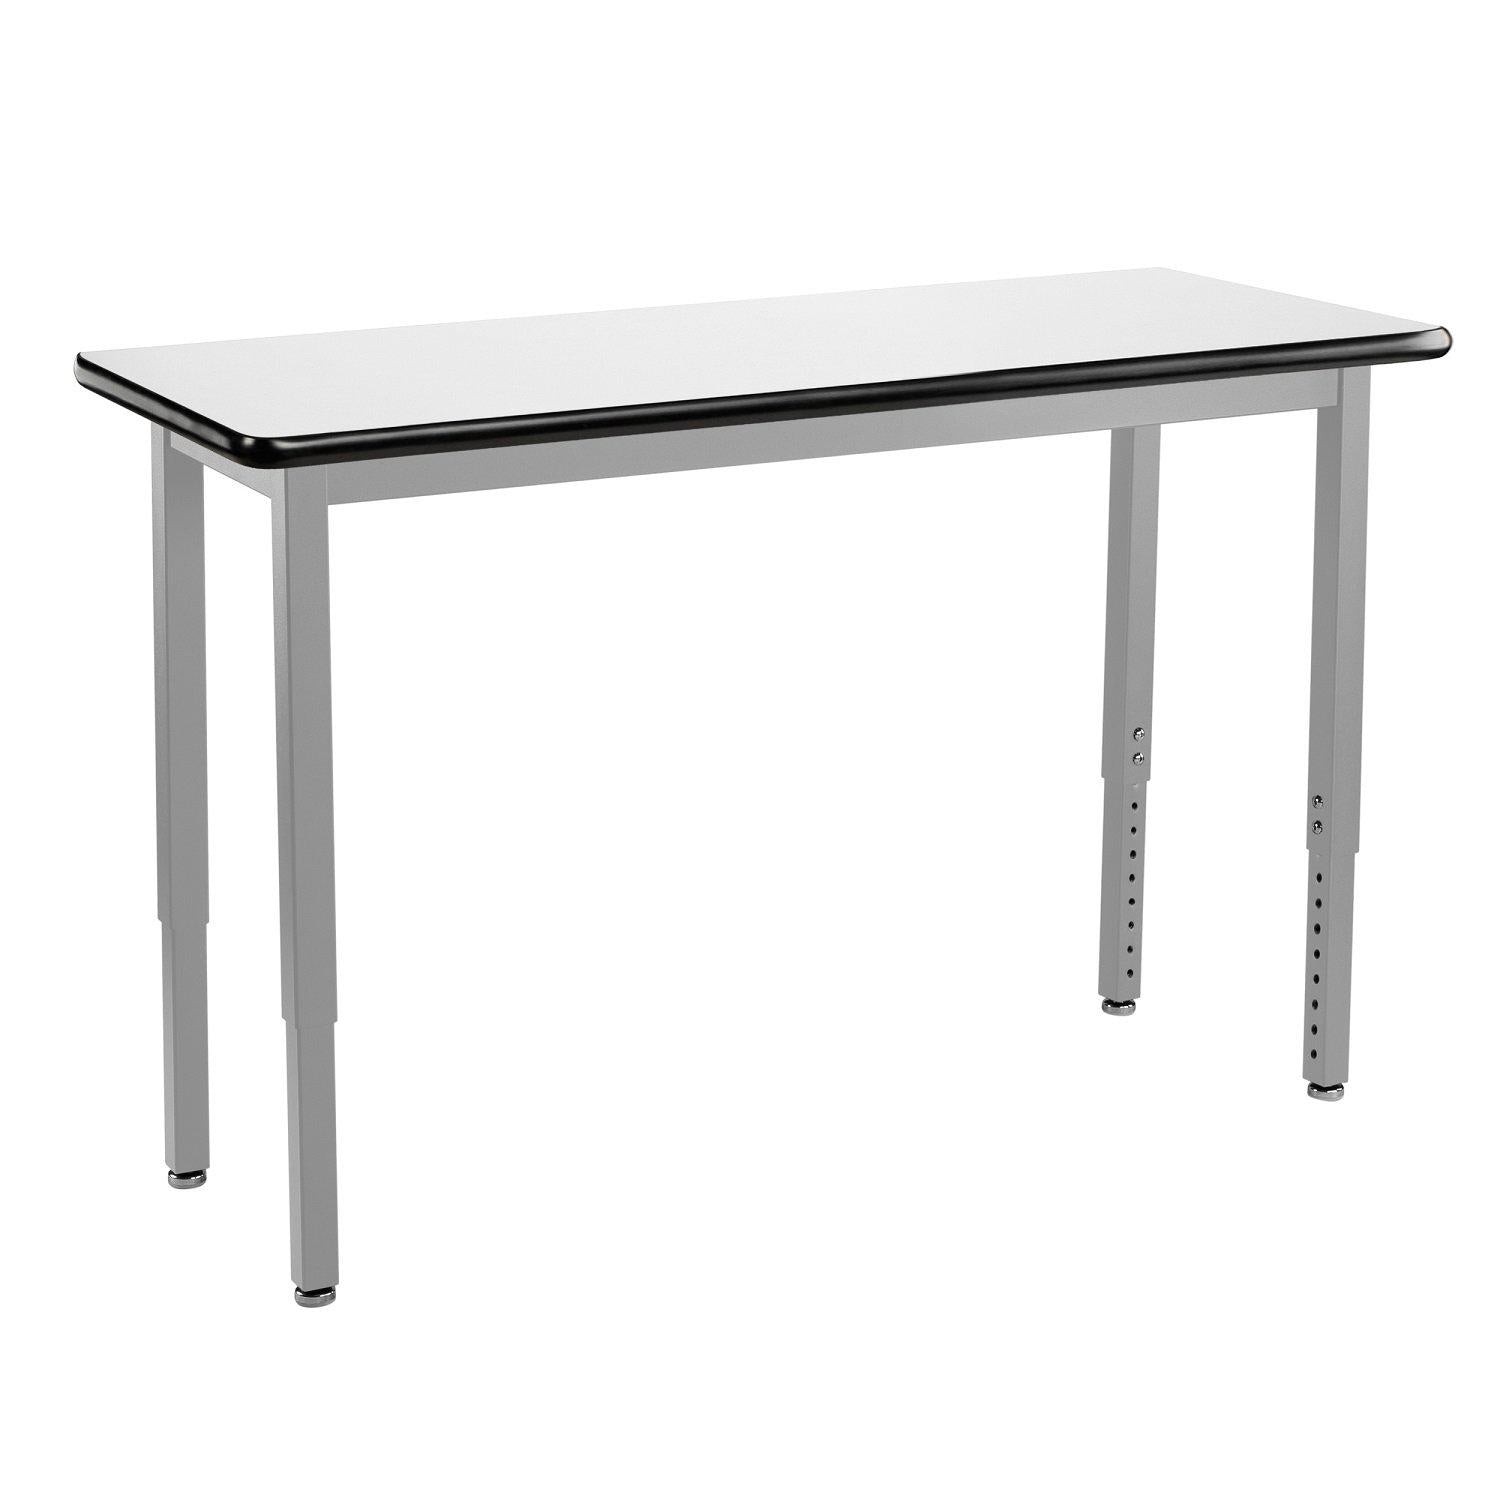 Heavy-Duty Height-Adjustable Utility Table, Soft Grey Frame, 18" x 48", Whiteboard High-Pressure Laminate Top